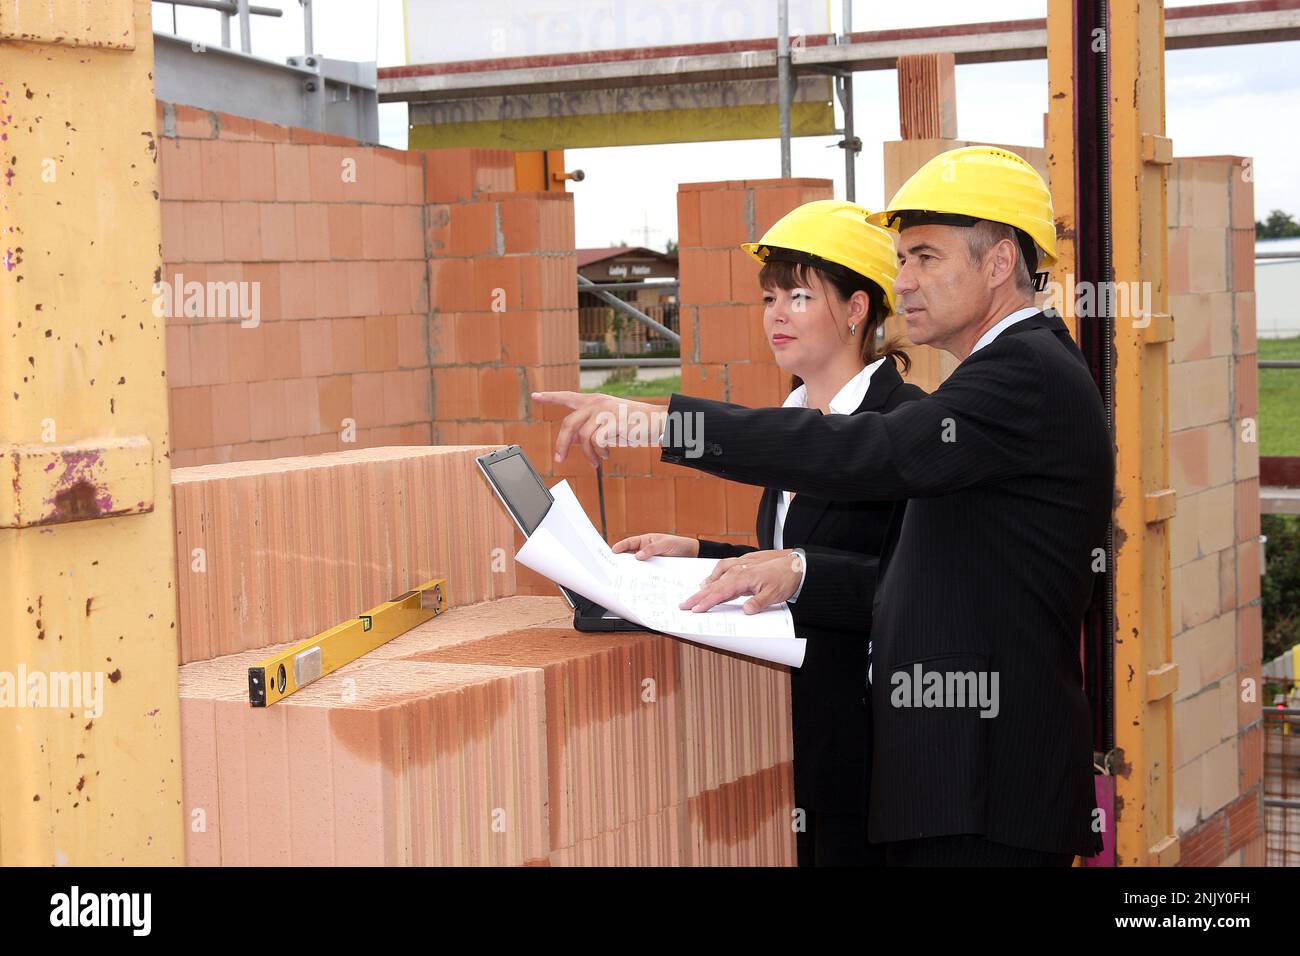 architects on the construction site Stock Photo